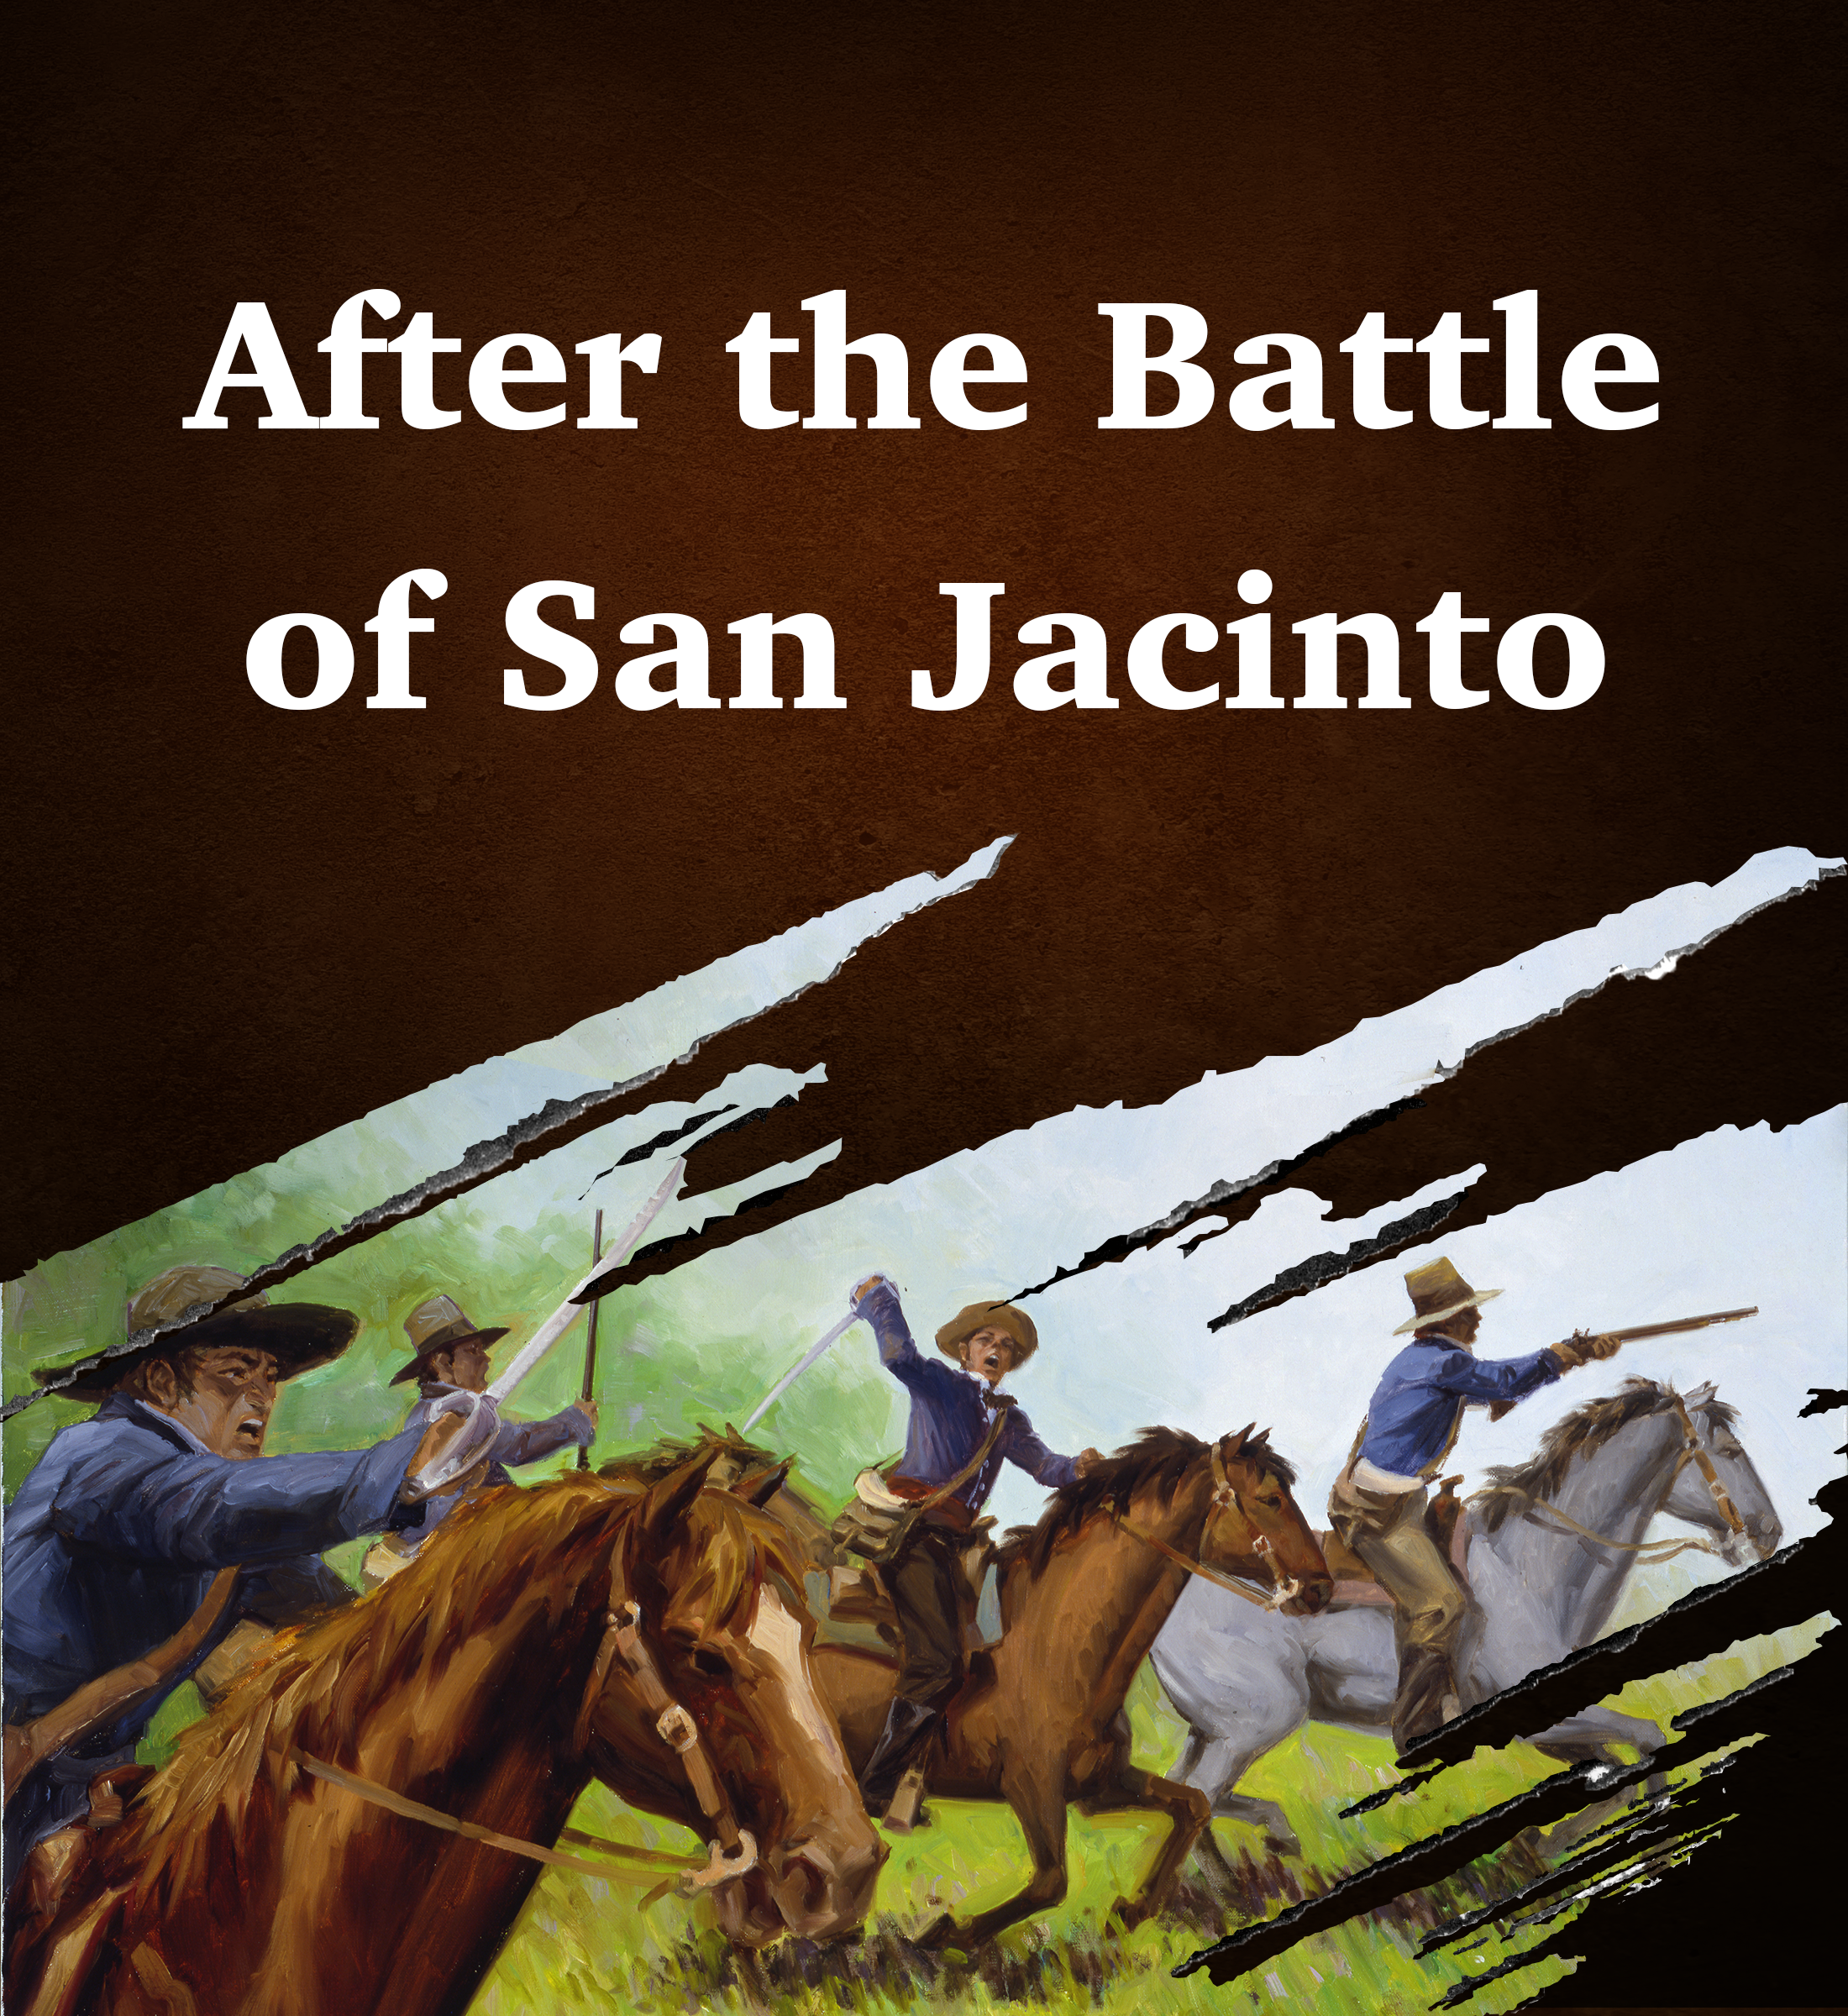 A poster for the special exhibit "After the Battle of San Jacinto" at the Museum of San Jacinto